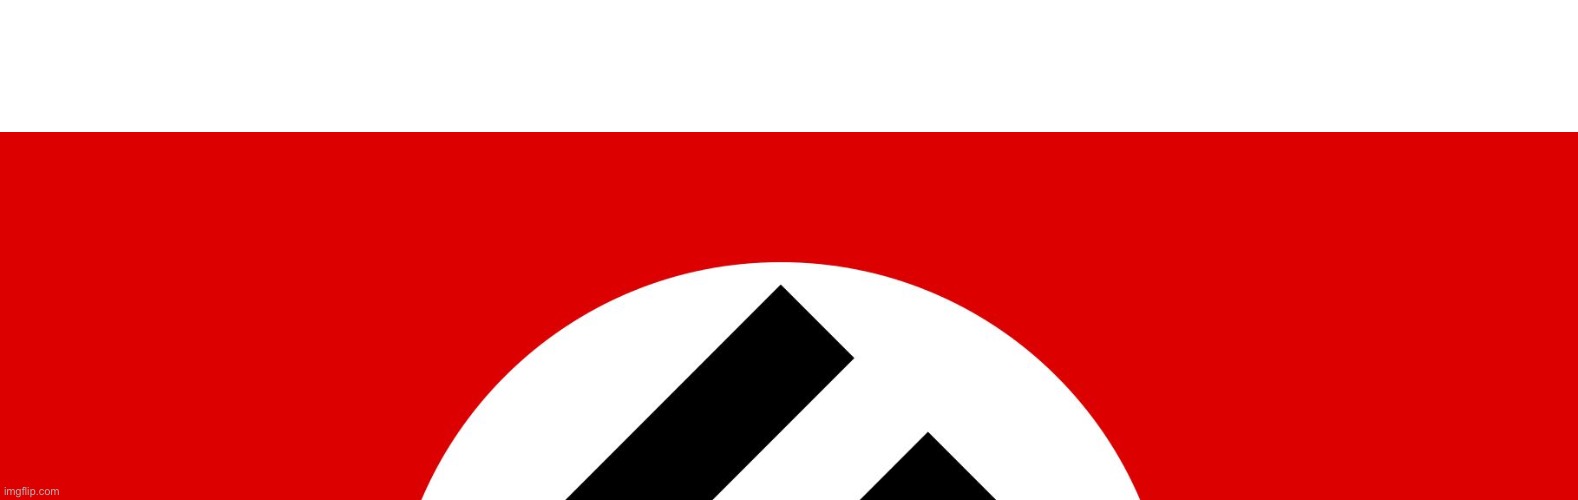 adidas logo simplified | image tagged in nazi flag | made w/ Imgflip meme maker